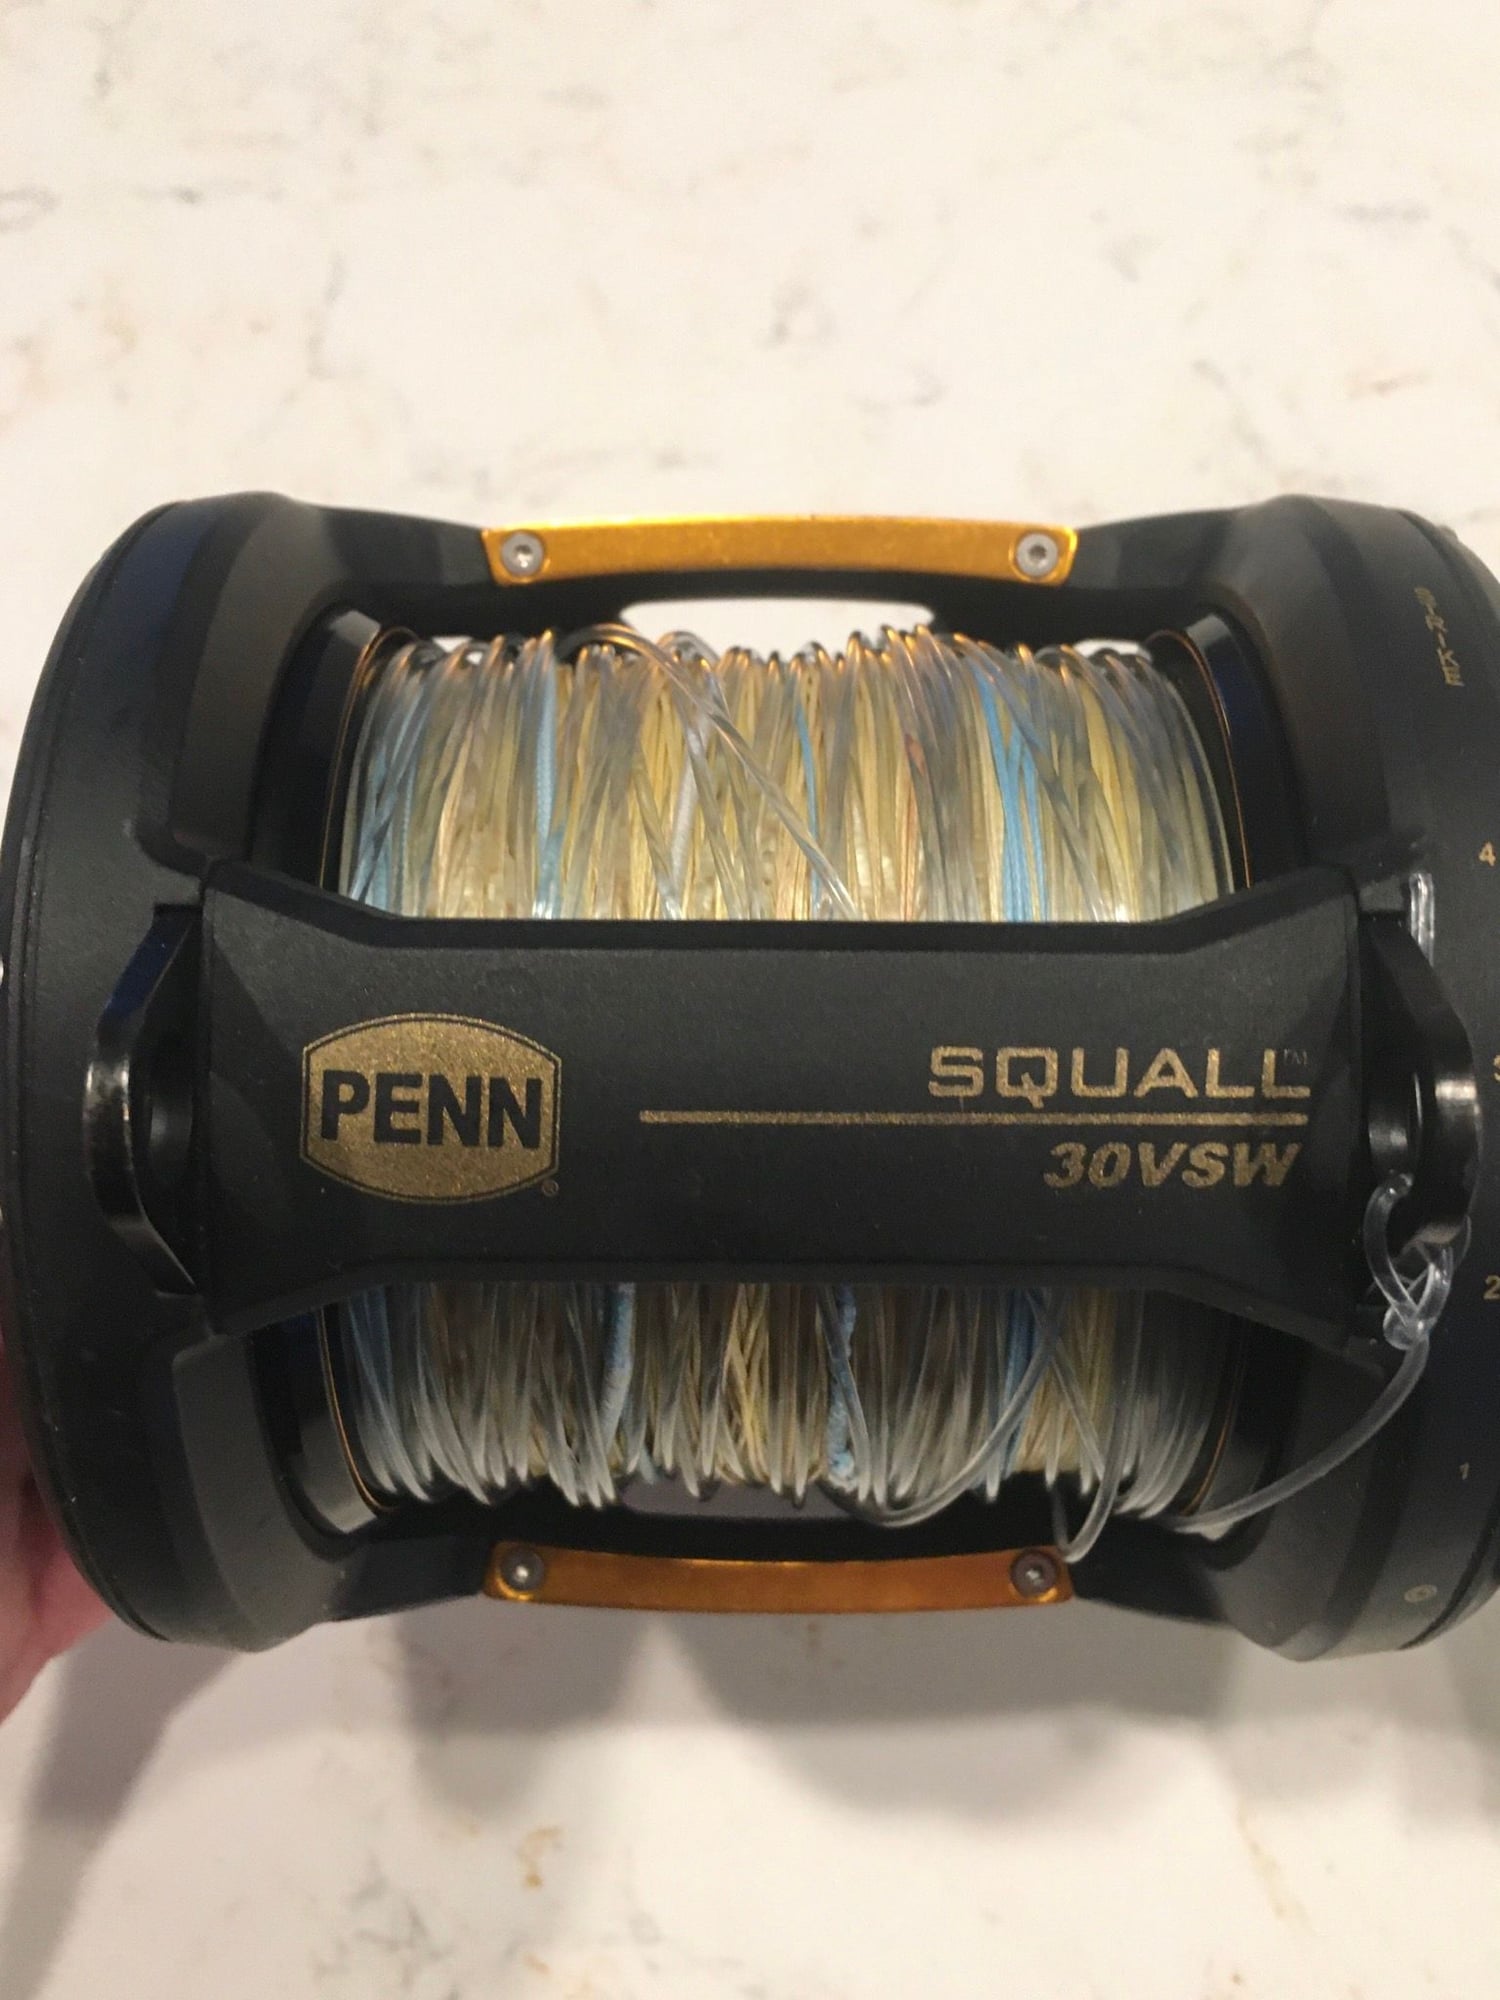 2 Penn Squall 30 VSW Combo's - The Hull Truth - Boating and Fishing Forum